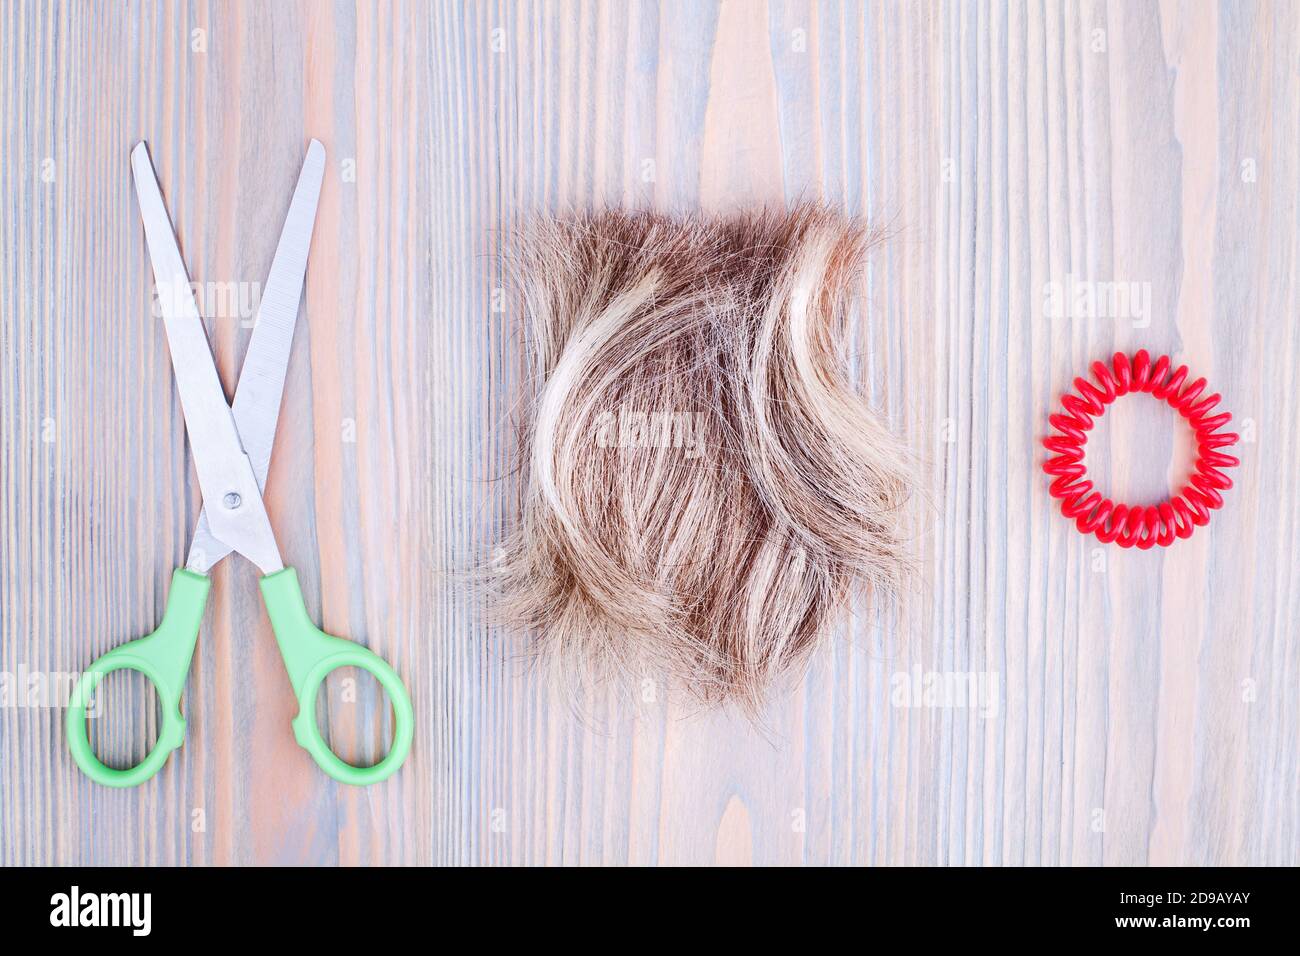 Blond hair lock, scissors, scrunchie light wooden background close up, cut off blonde hair curl on bright wood, shears, spiral hair band barrette Stock Photo